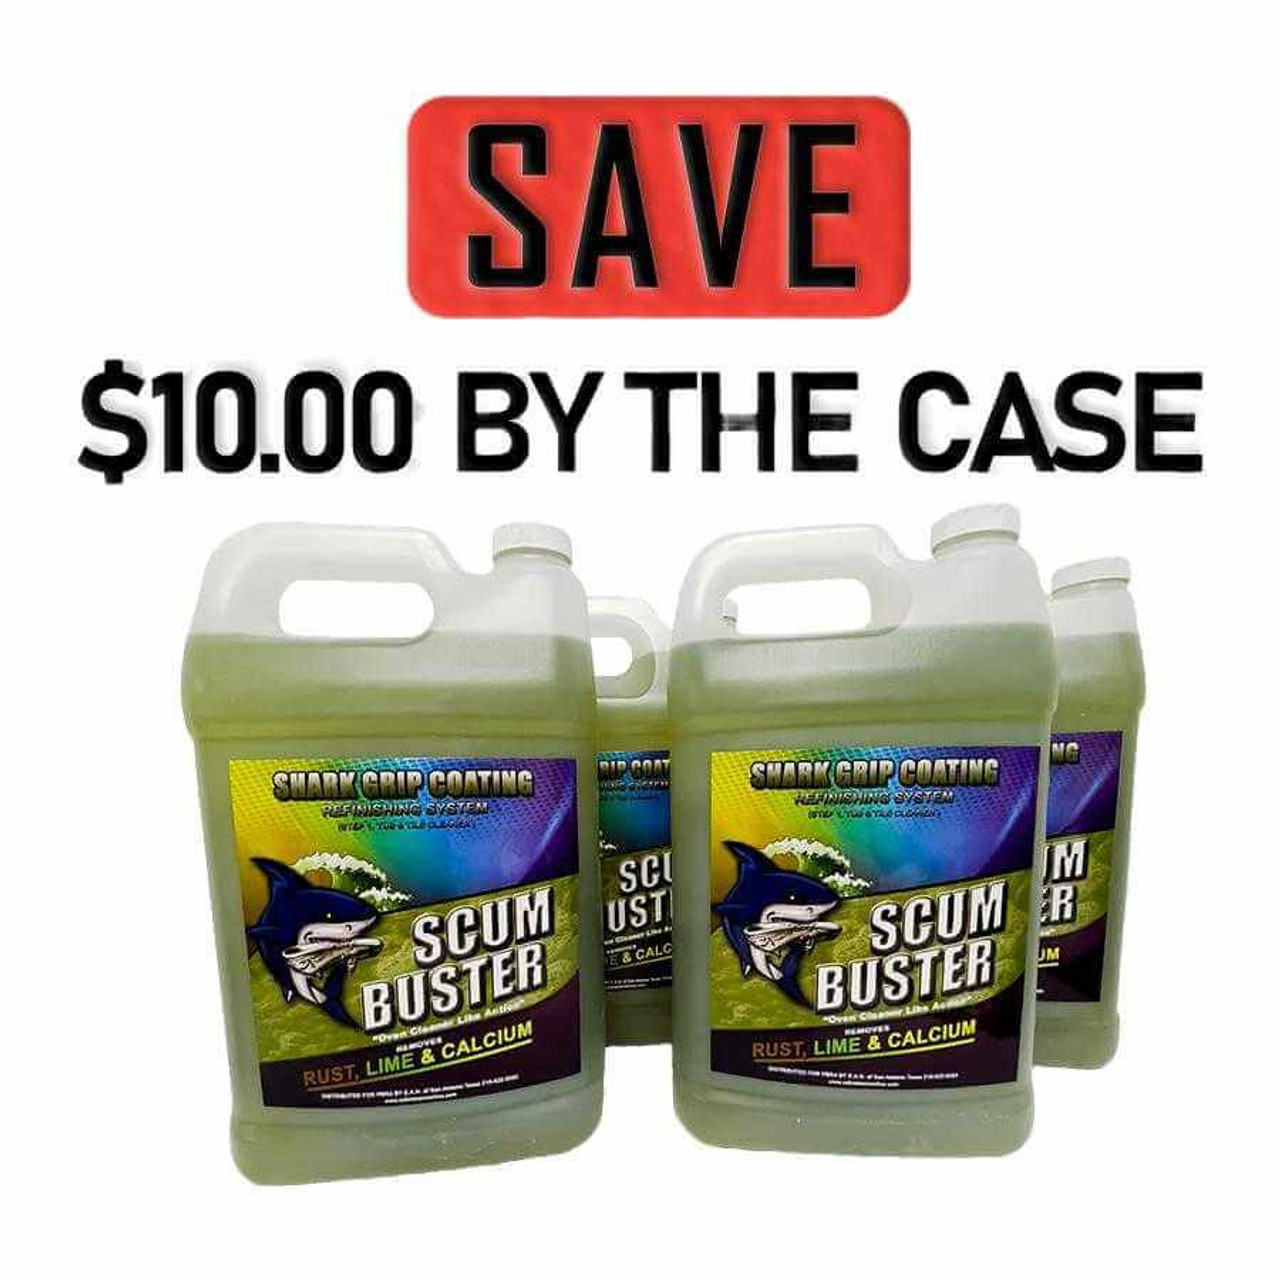 Industrial Soap Scum Buster Bathtub and Tile Cleaner